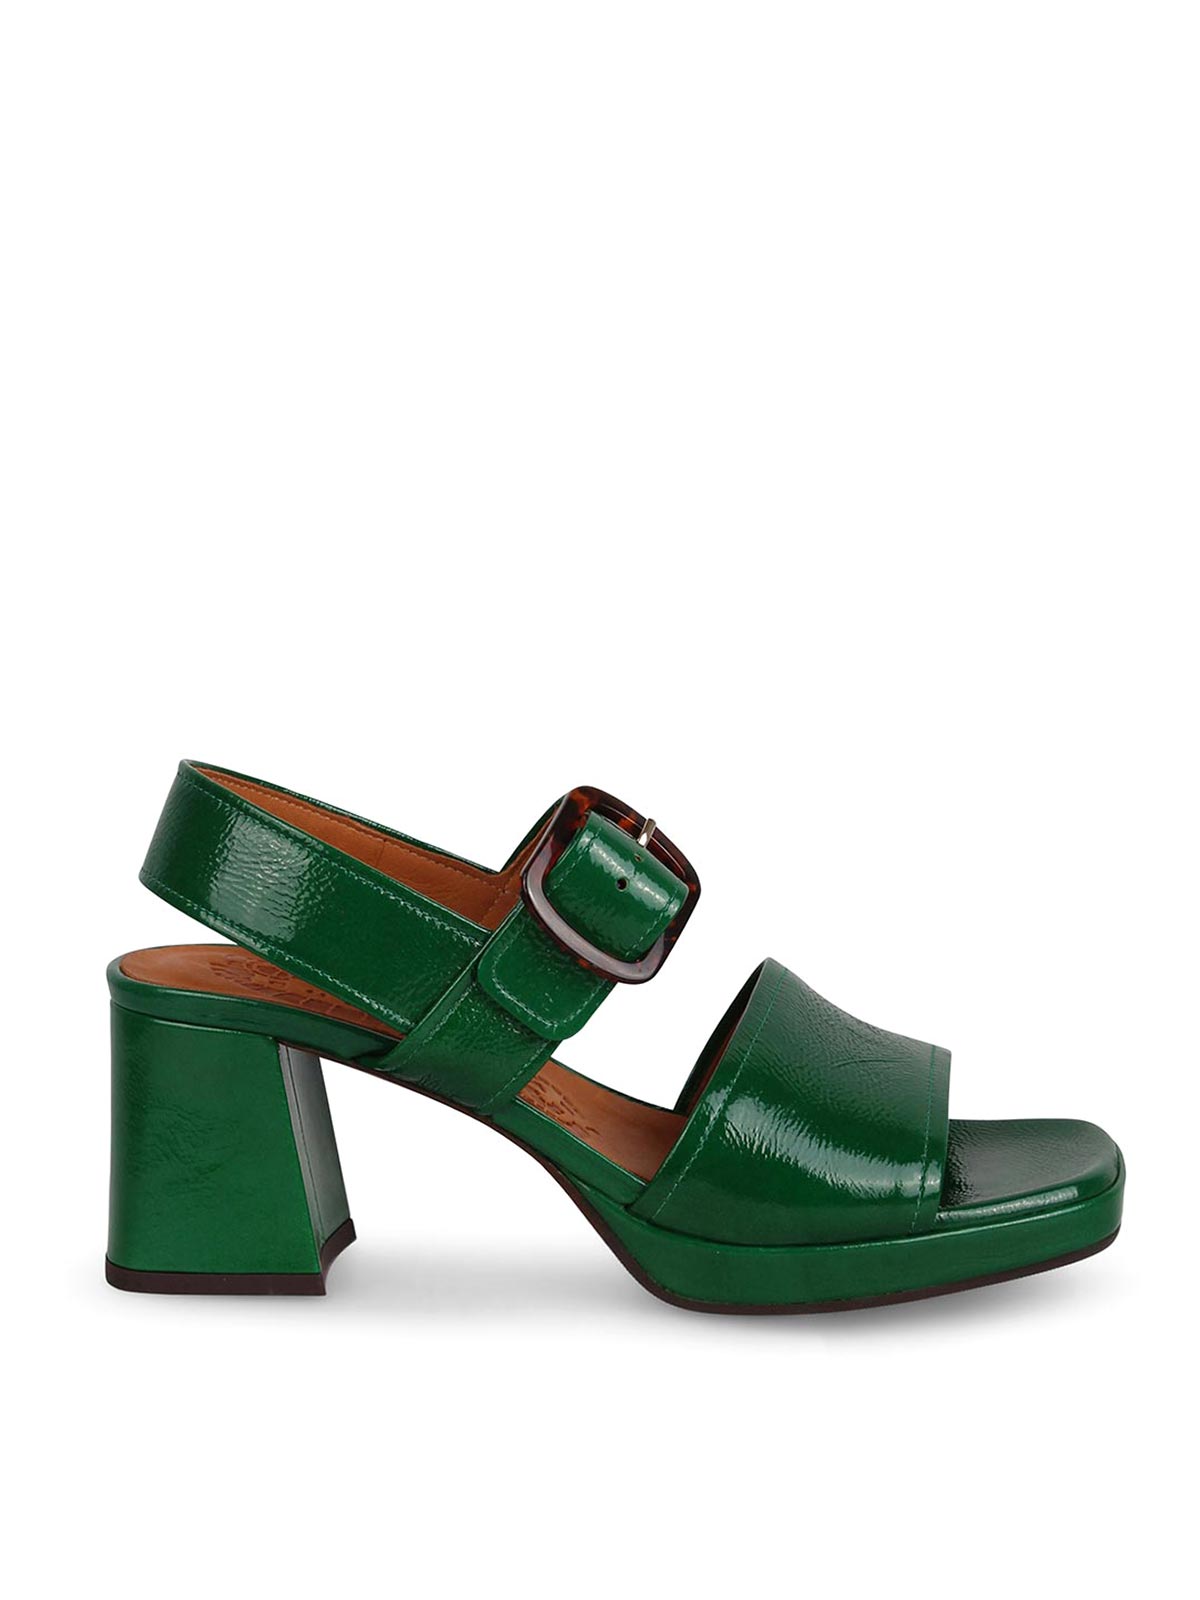 Chie Mihara Ginka Sandals 75mm In Green